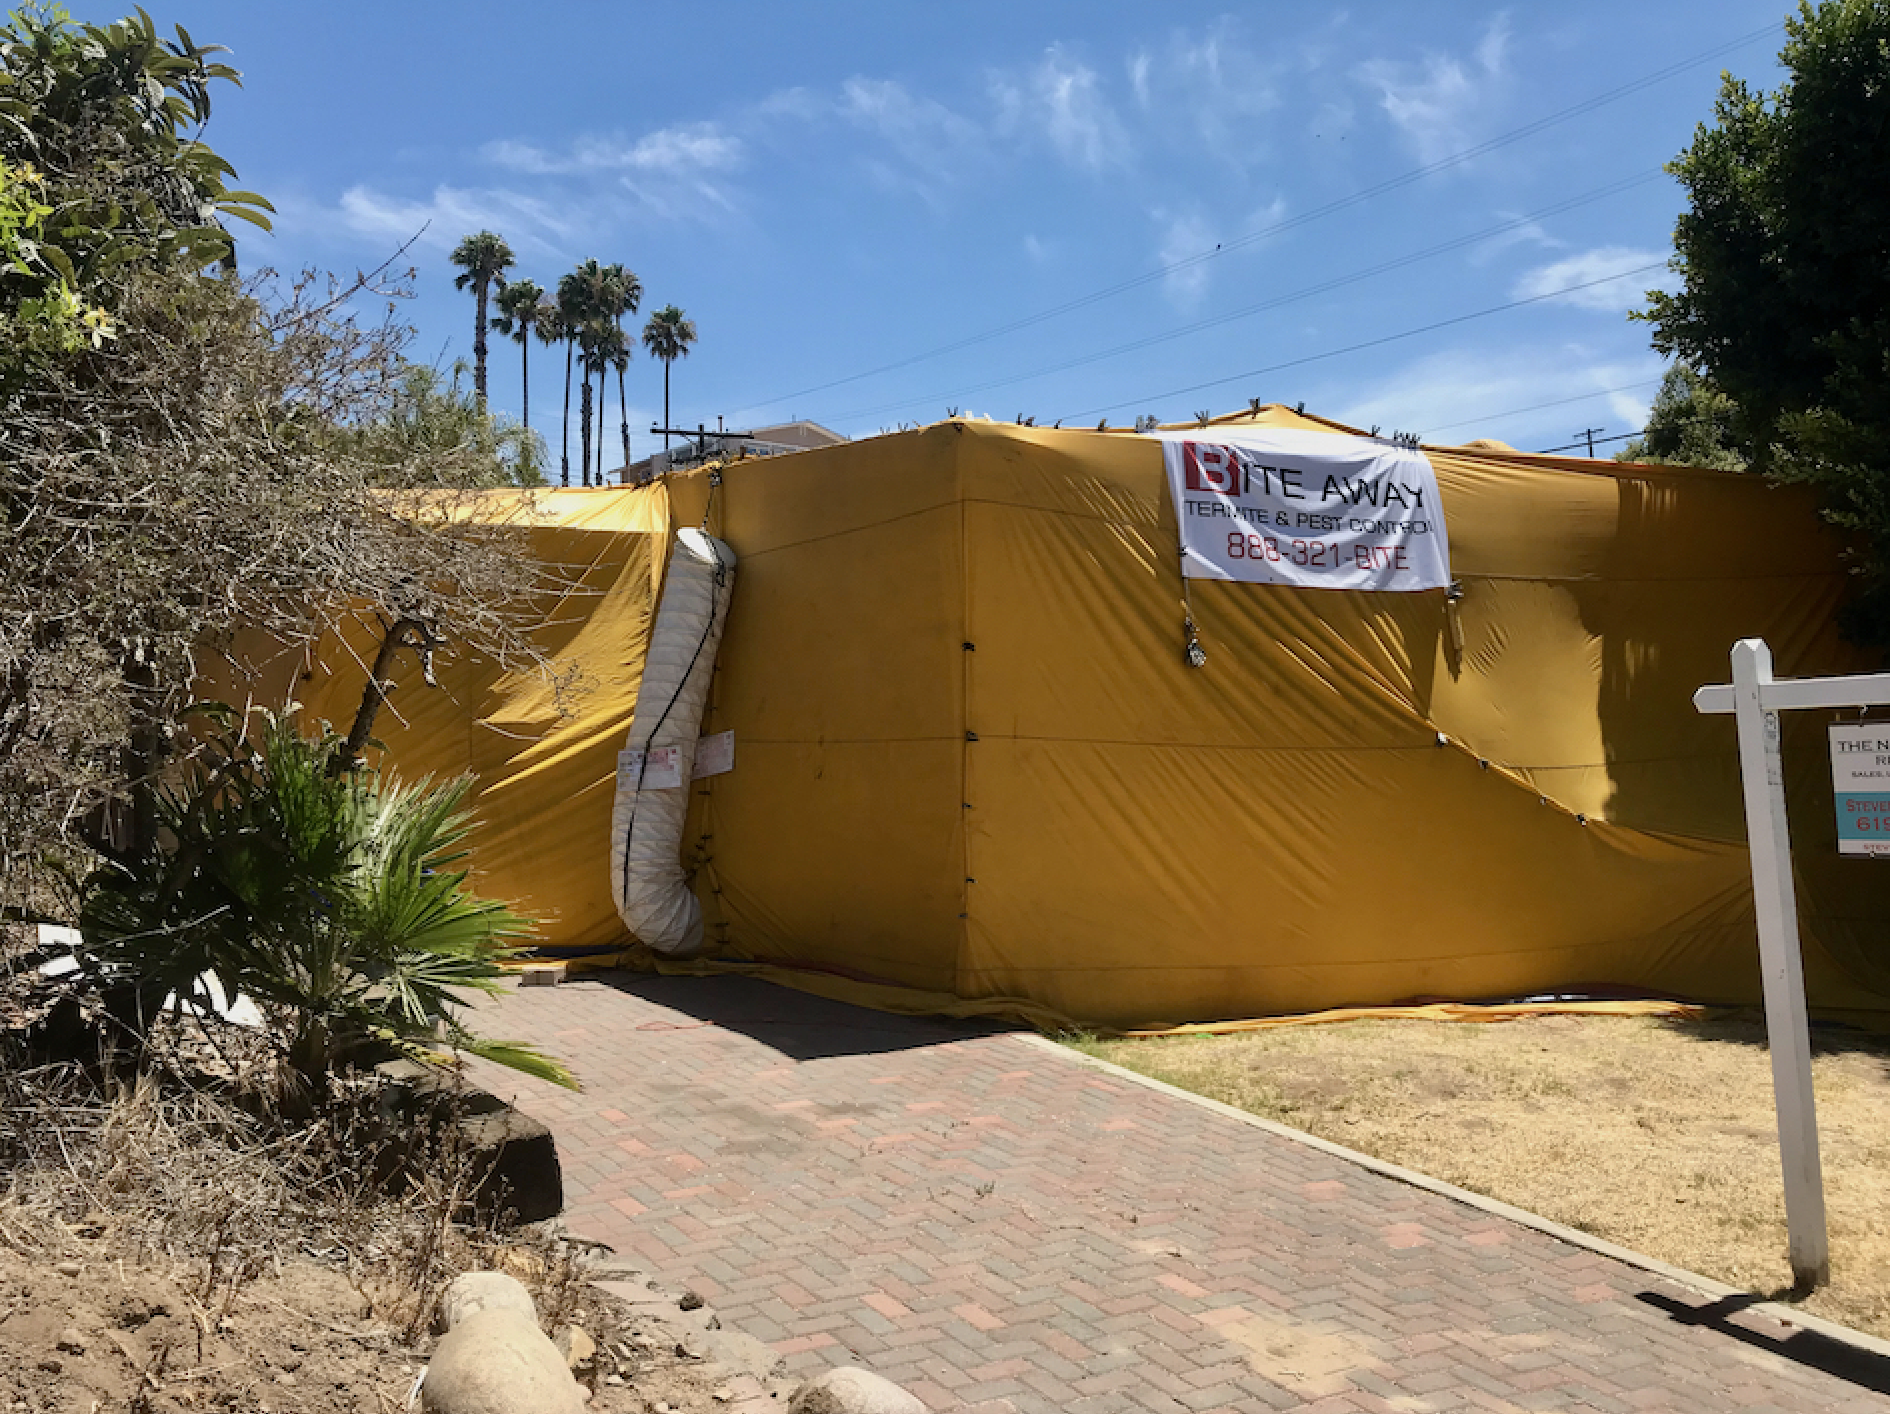 House with fumigation tent